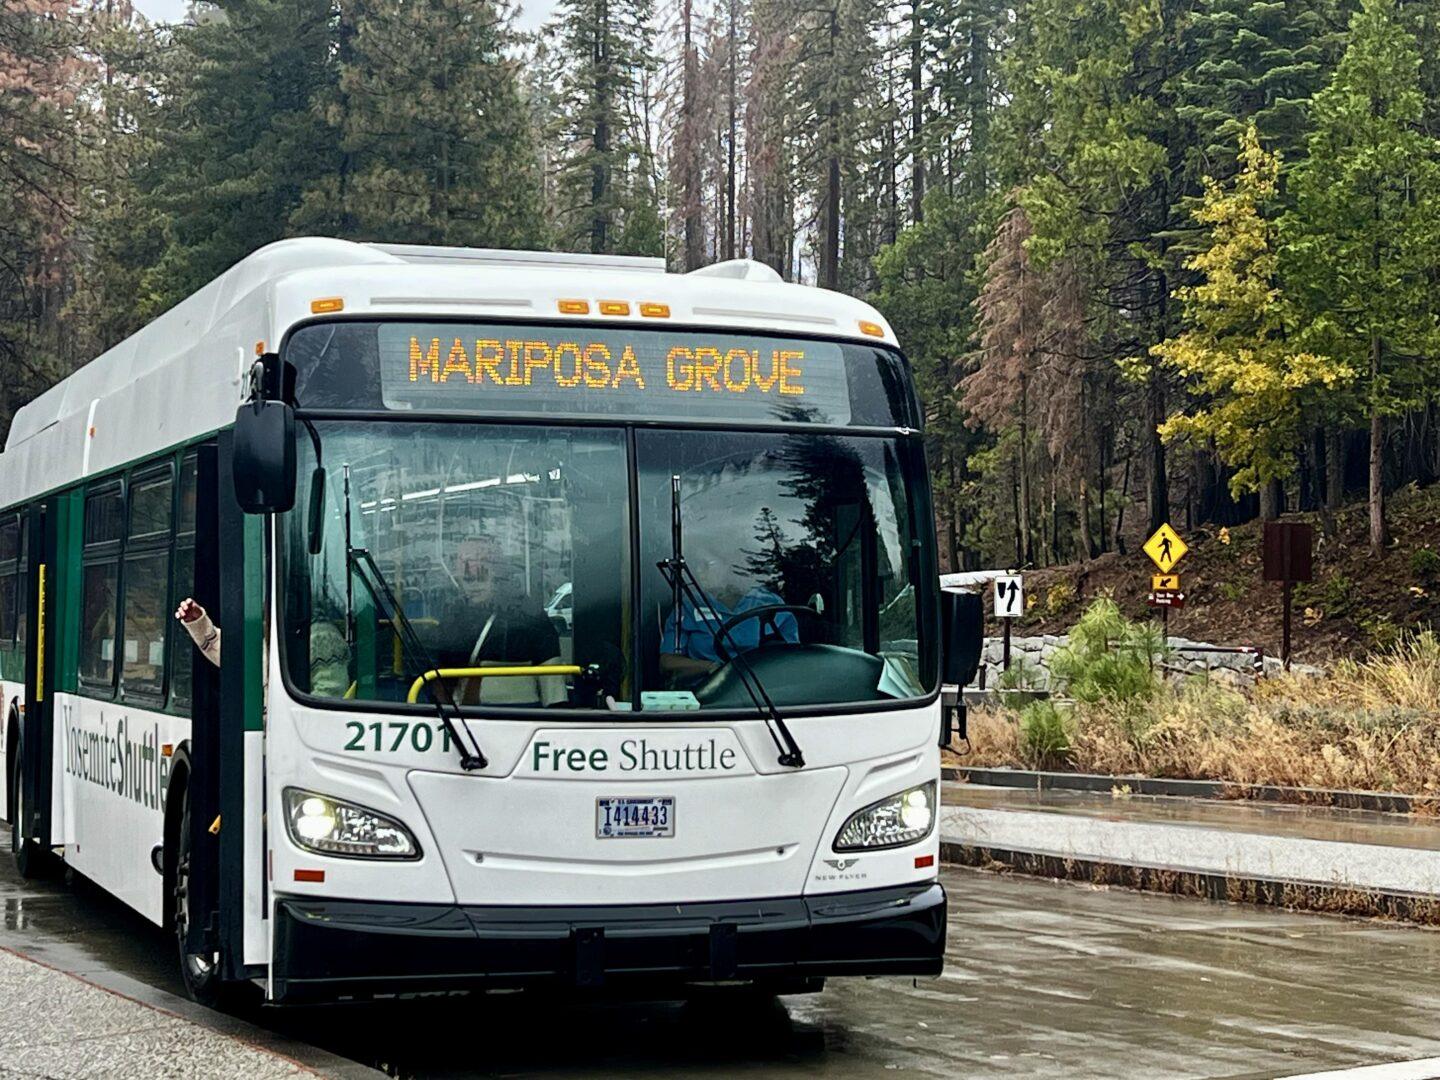 Shuttle bus with Mariposa Grove showing as destination 